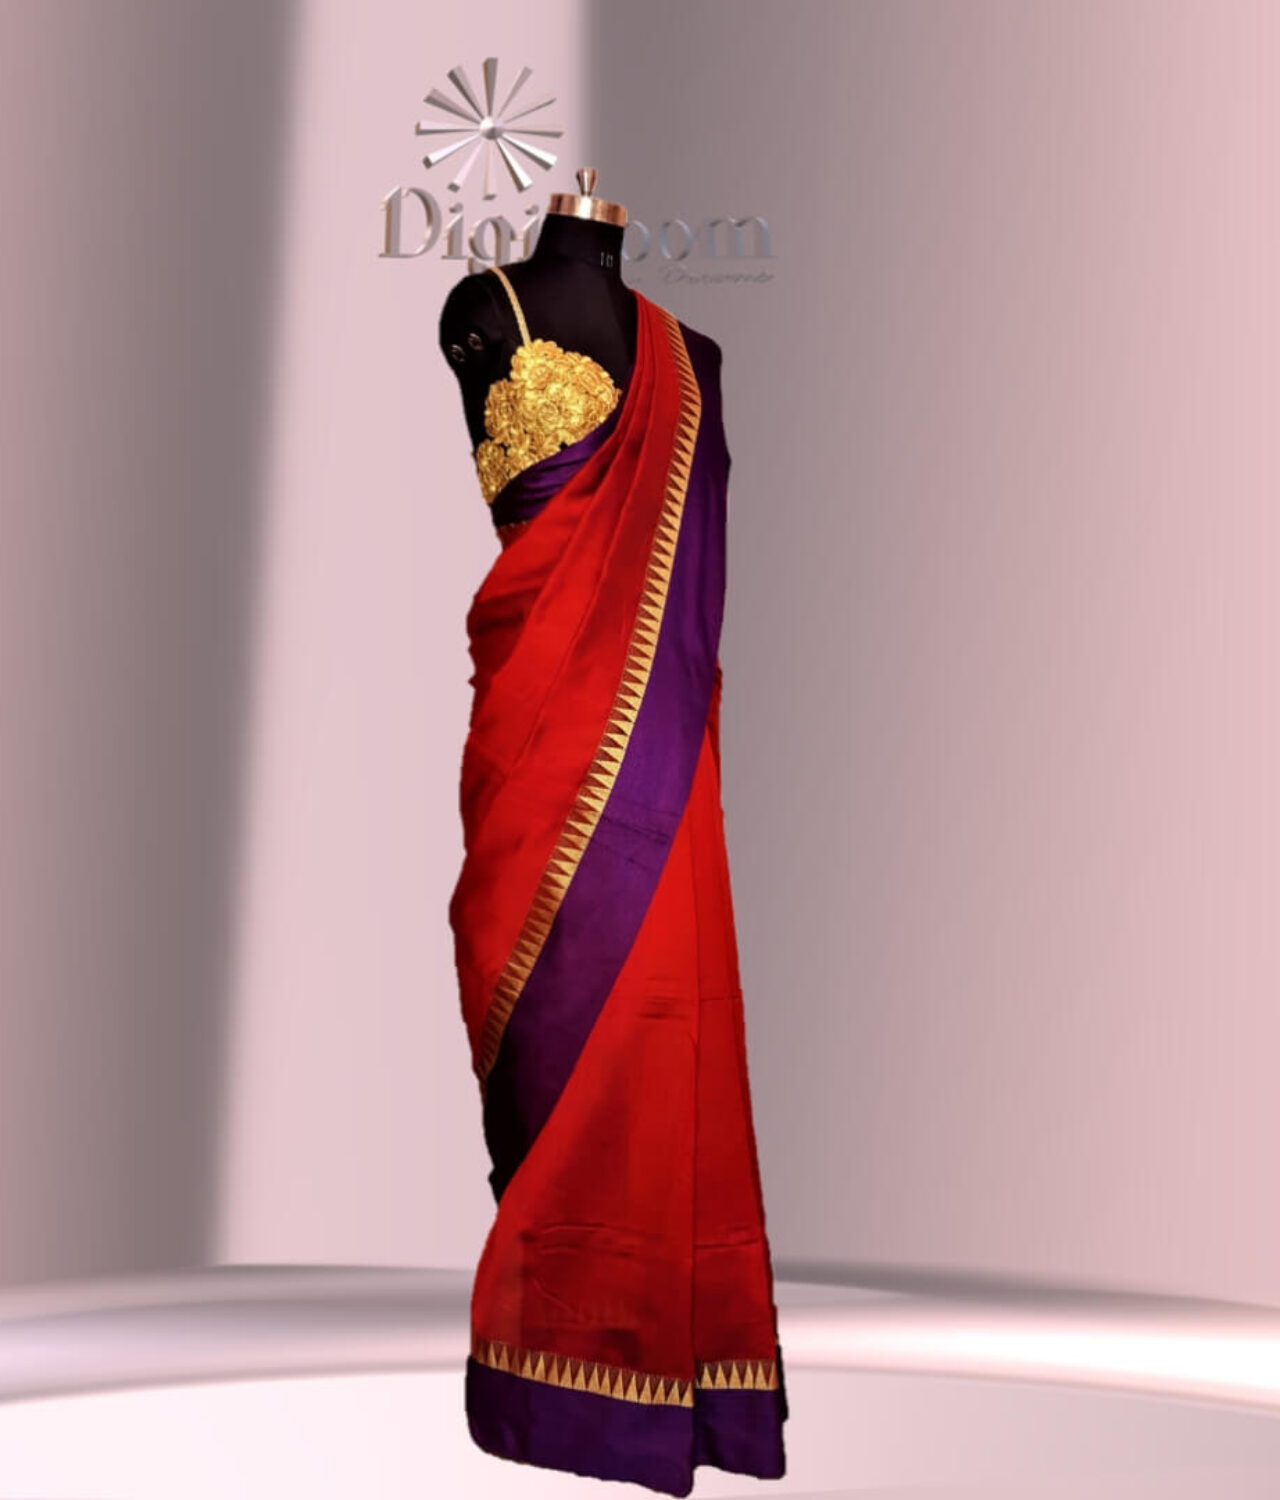 Bengal Handloom Cotton Silk Saree in deep red colour with a contrast Pallu-a